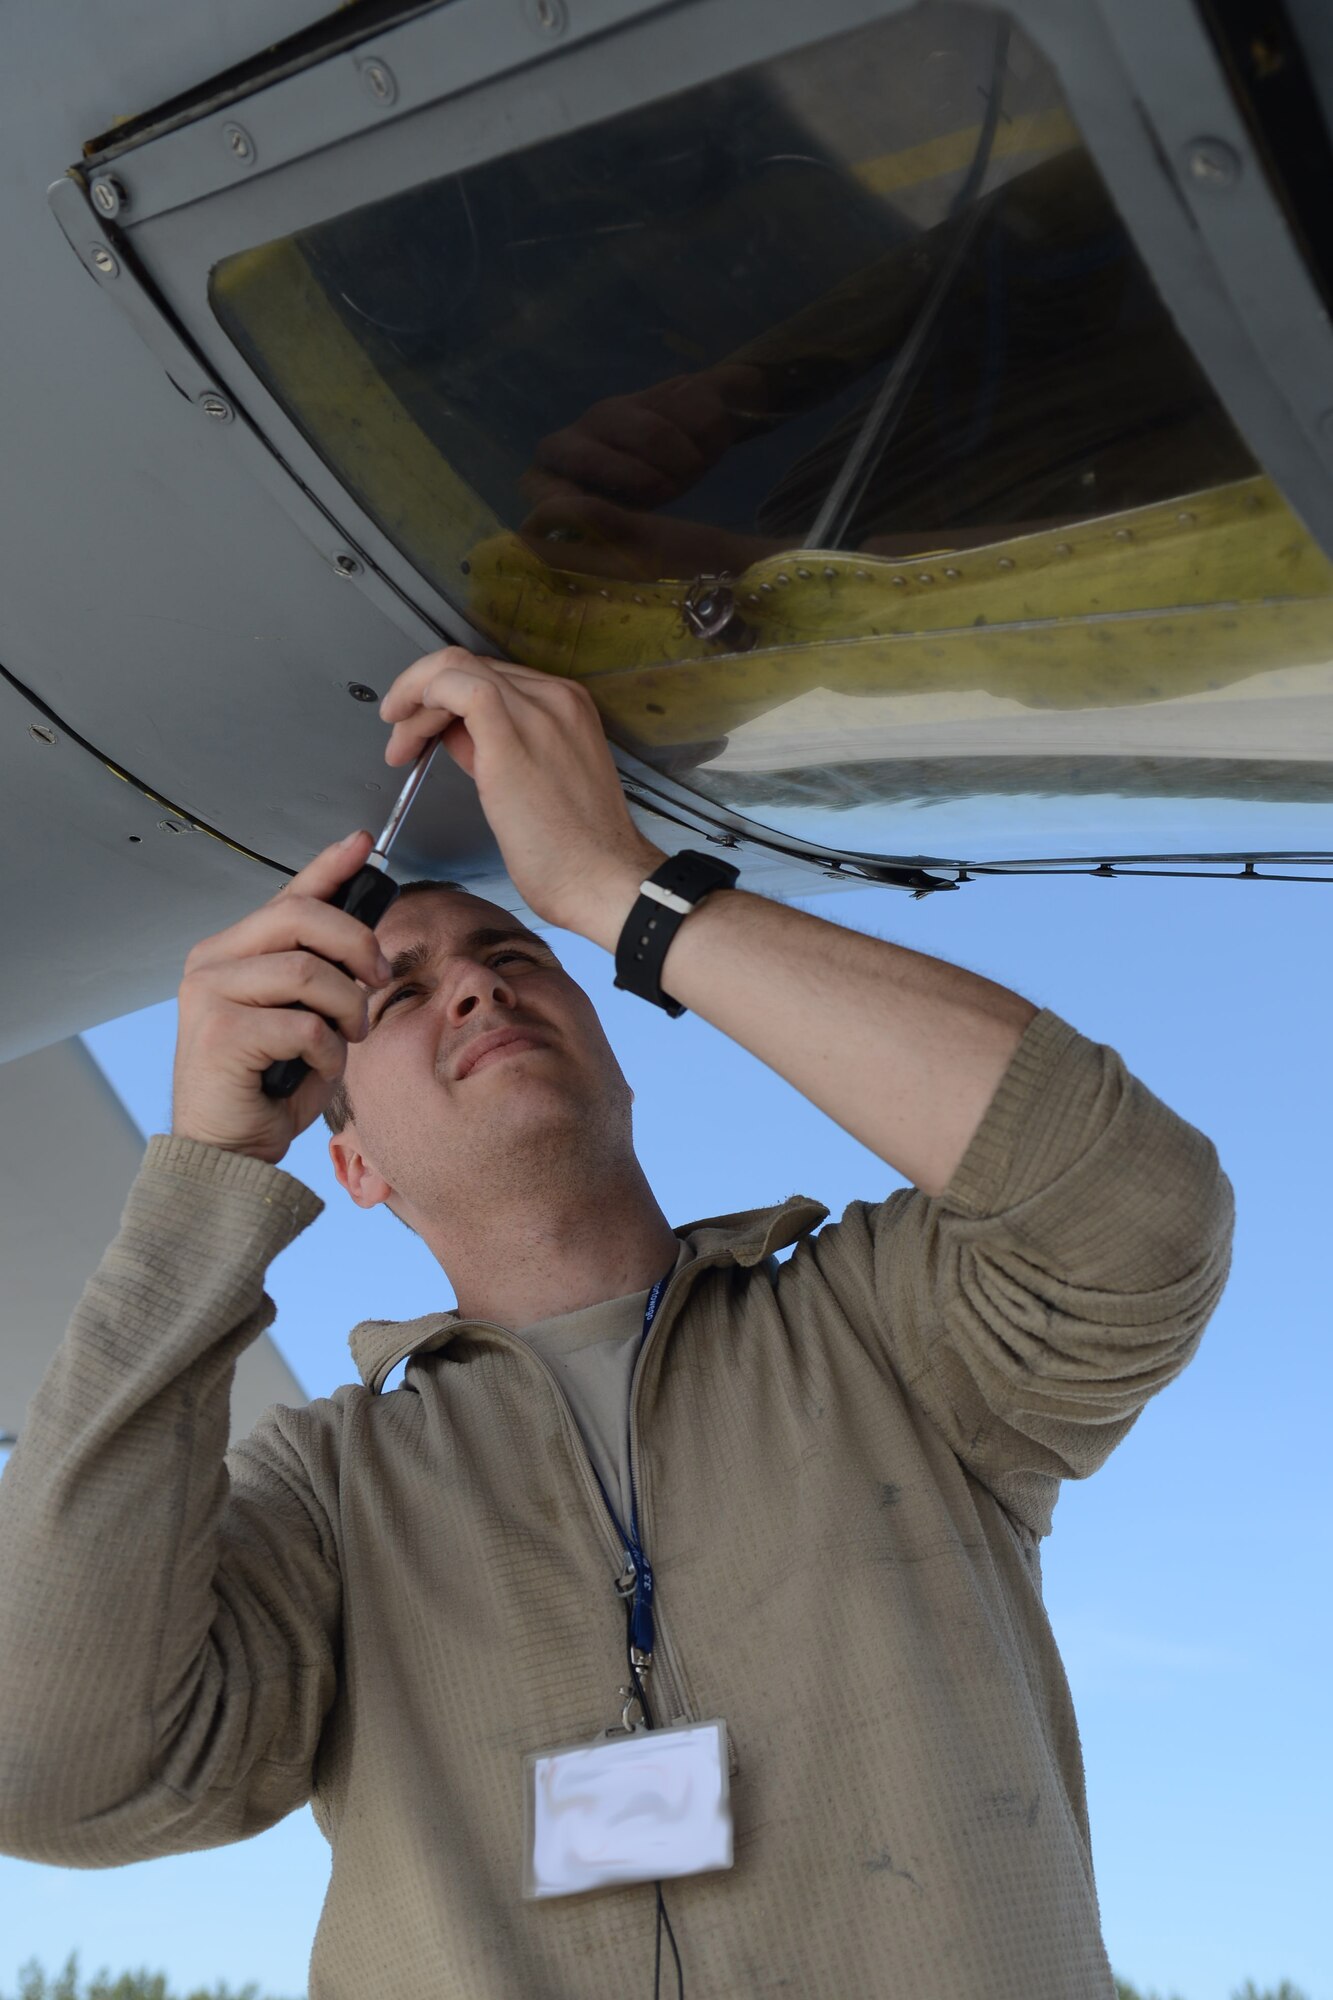 U.S. Air Force Staff Sgt. Robert Kayser, 351st Expeditionary Air Refueling Squadron-Poland hydraulics craftsman from Meridian, Miss., performs routine maintenance on a KC-135 Stratotanker June 11, 2014, following a Baltic Operations Exercise mission out of Powidz Air Base, Poland. The BALTOPS Exercise provides the opportunity for personnel of participating nations to engage in realistic training to build experience, teamwork and strengthen interoperability while working toward mutual goals. (U.S. Air Force photo/Airman 1st Class Kyla Gifford/Released)